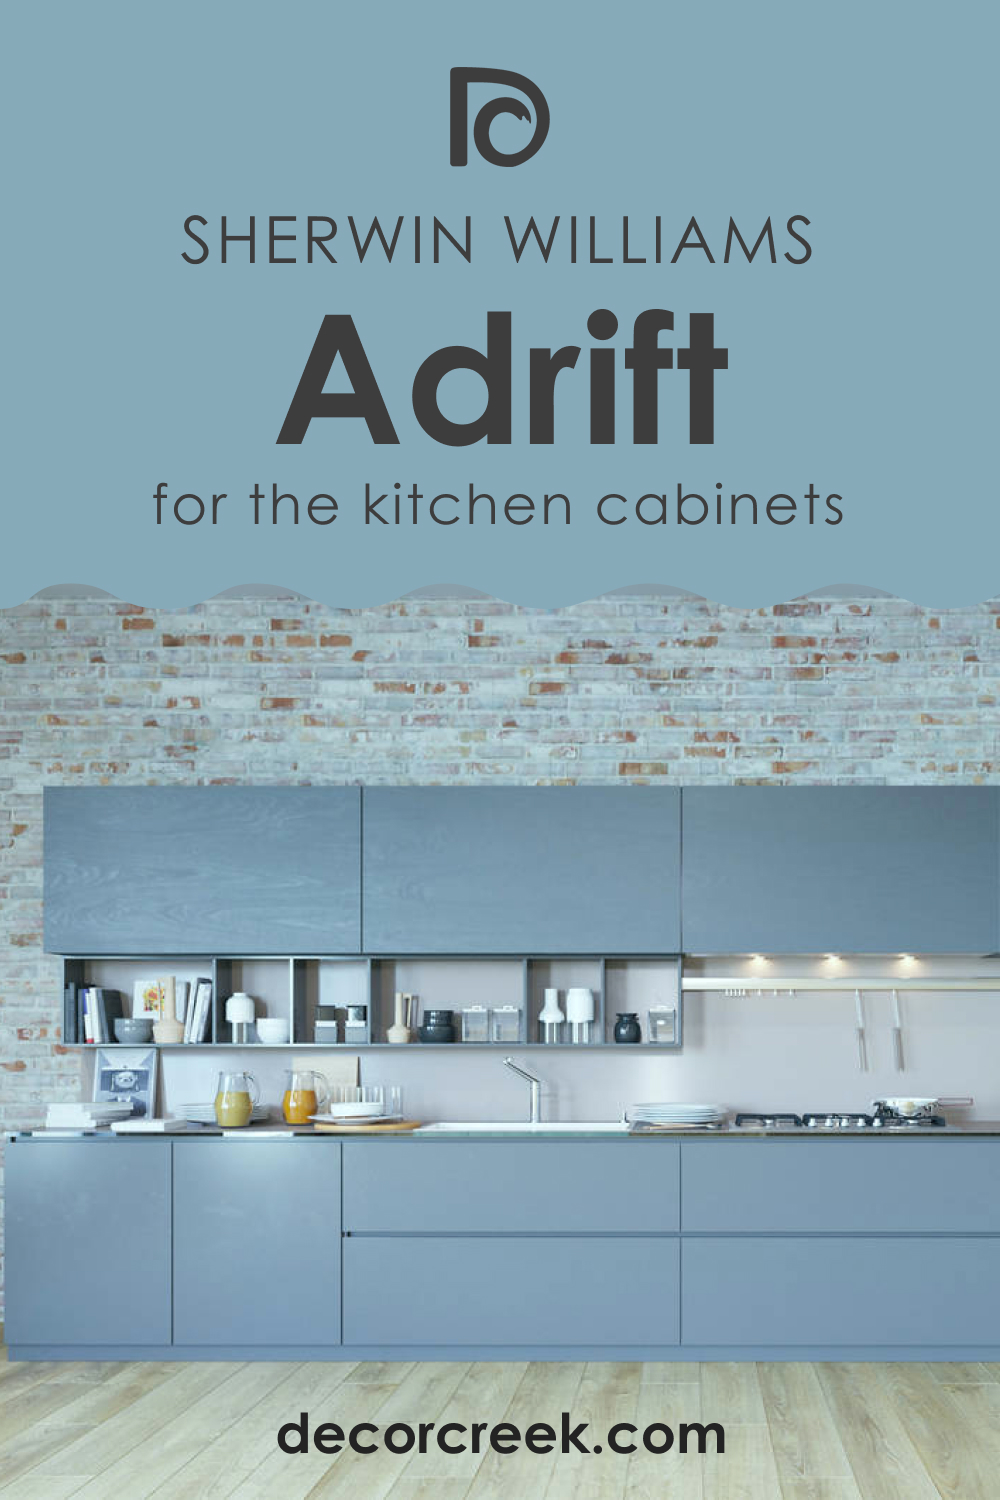 How to Use SW 7608 Adrift for the Kitchen Cabinets?